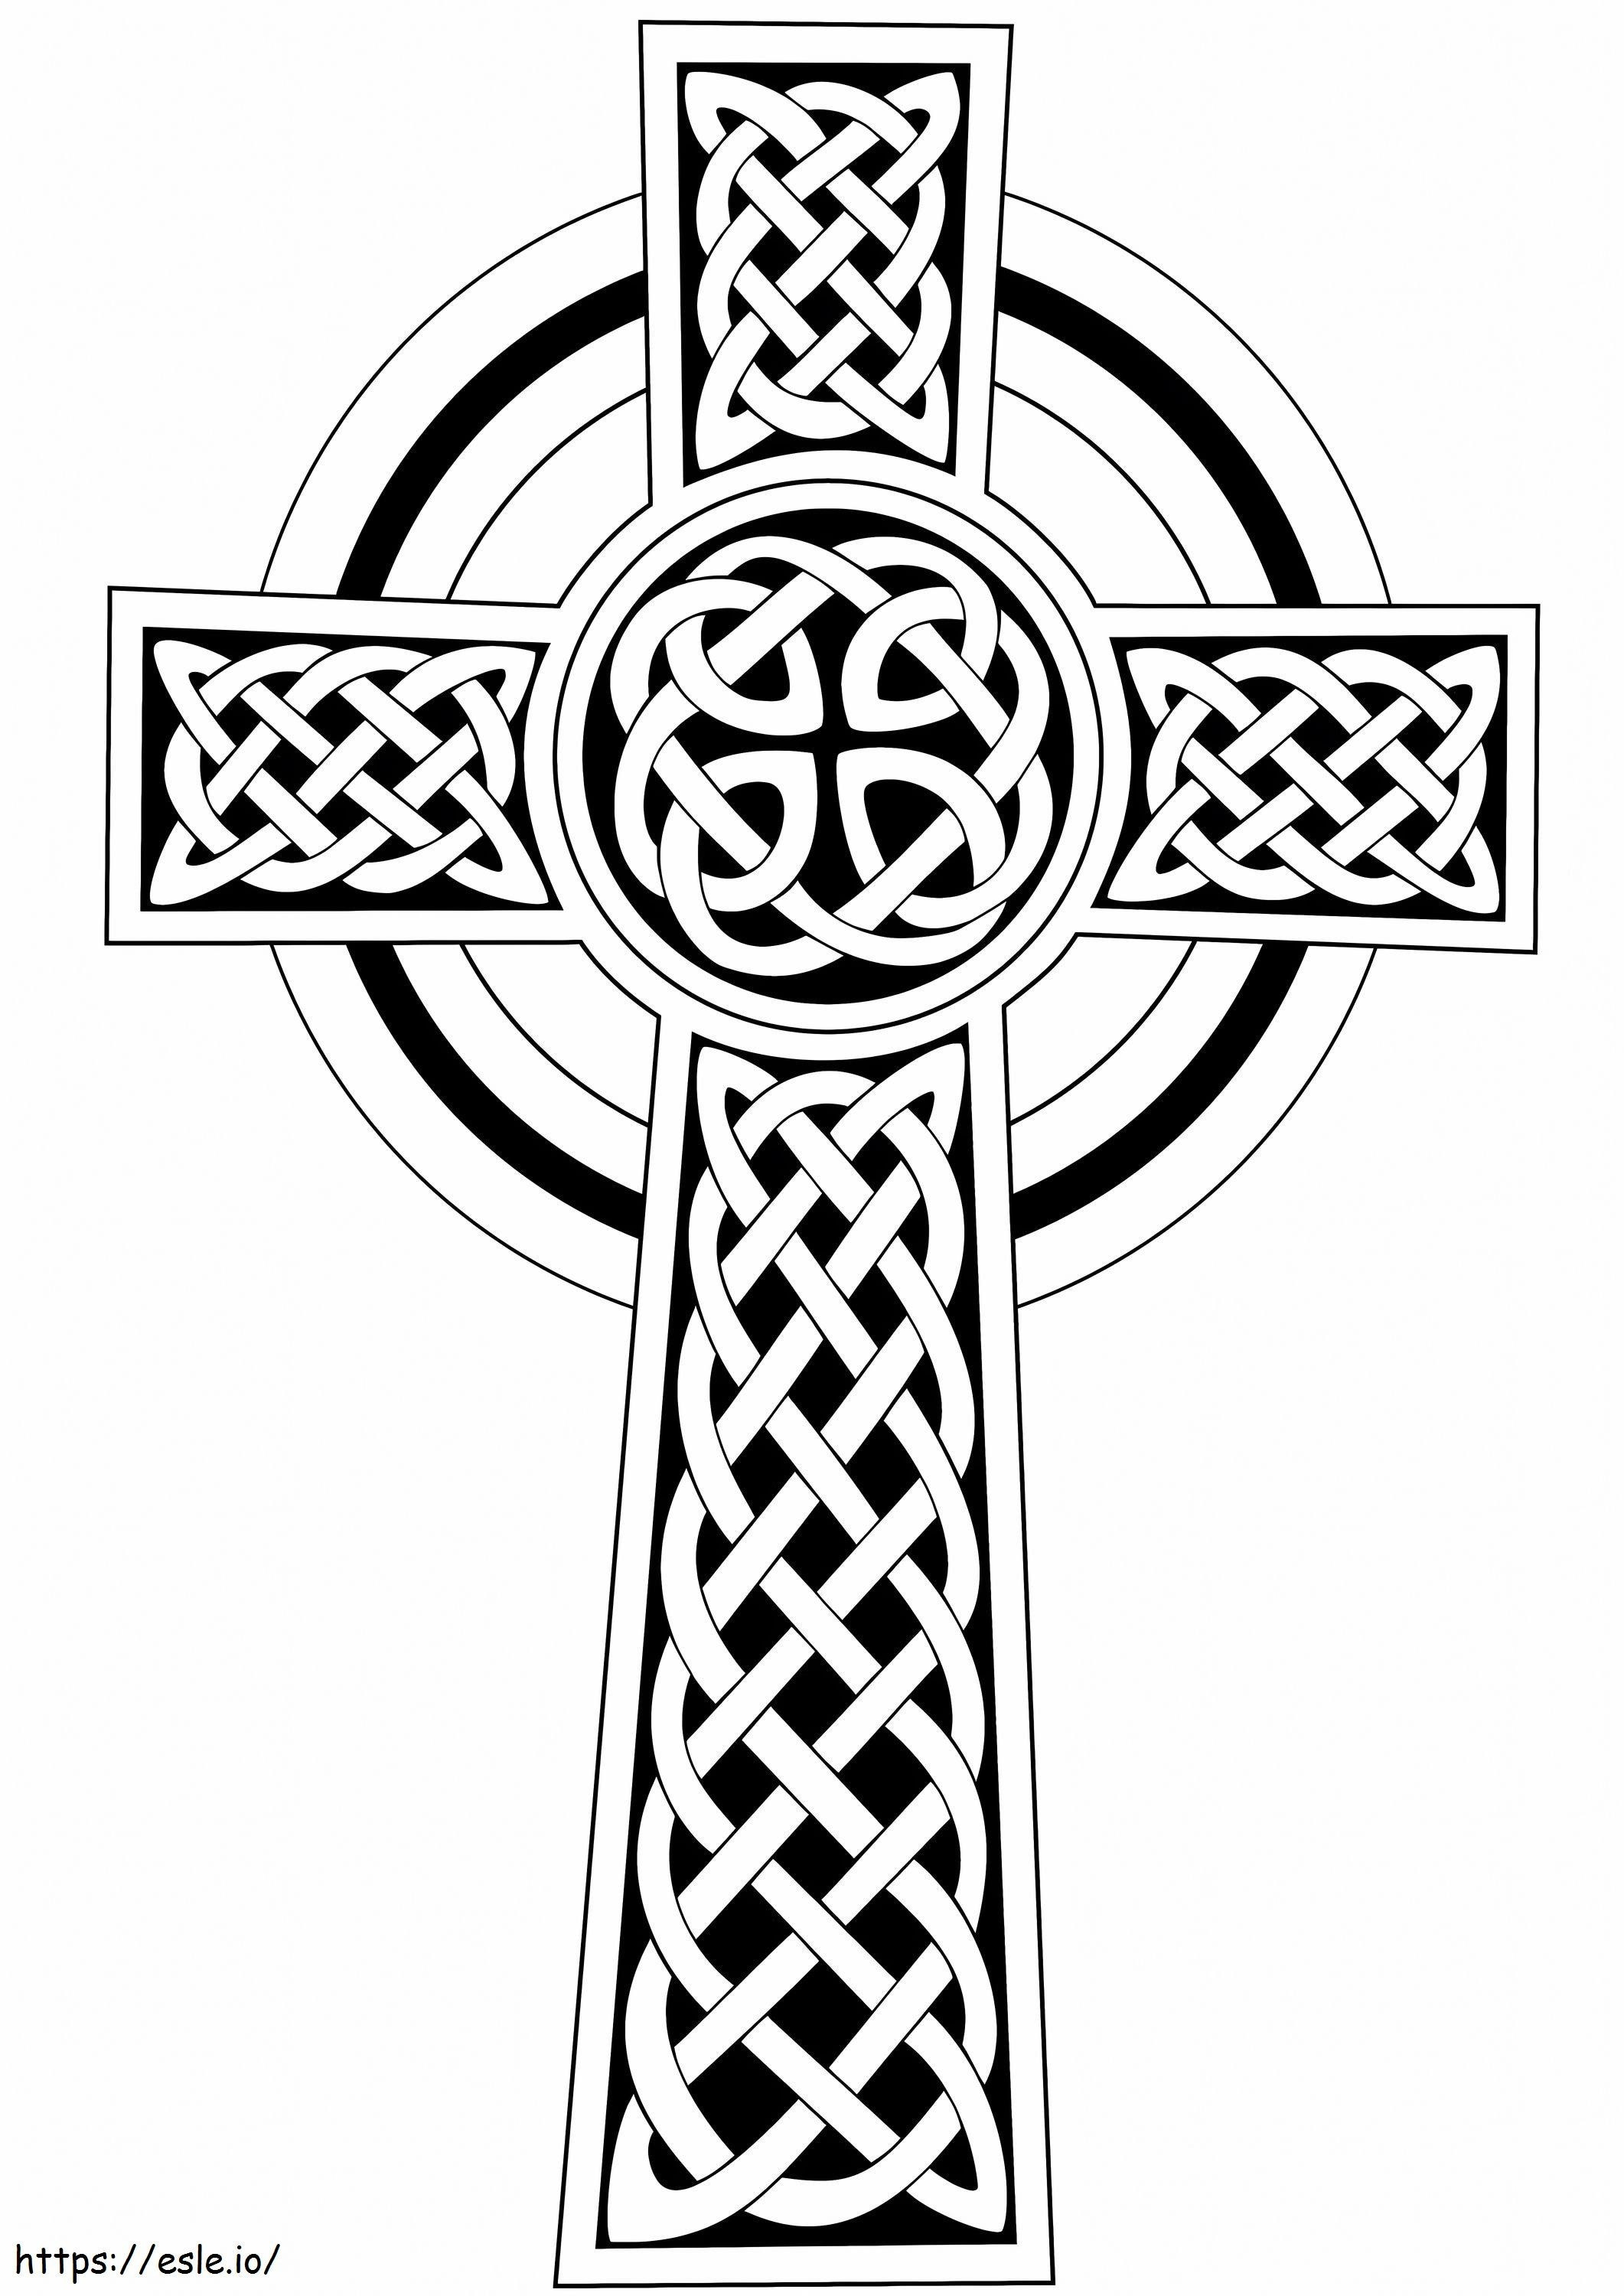 1576572070 Celtic Cross 1 coloring page